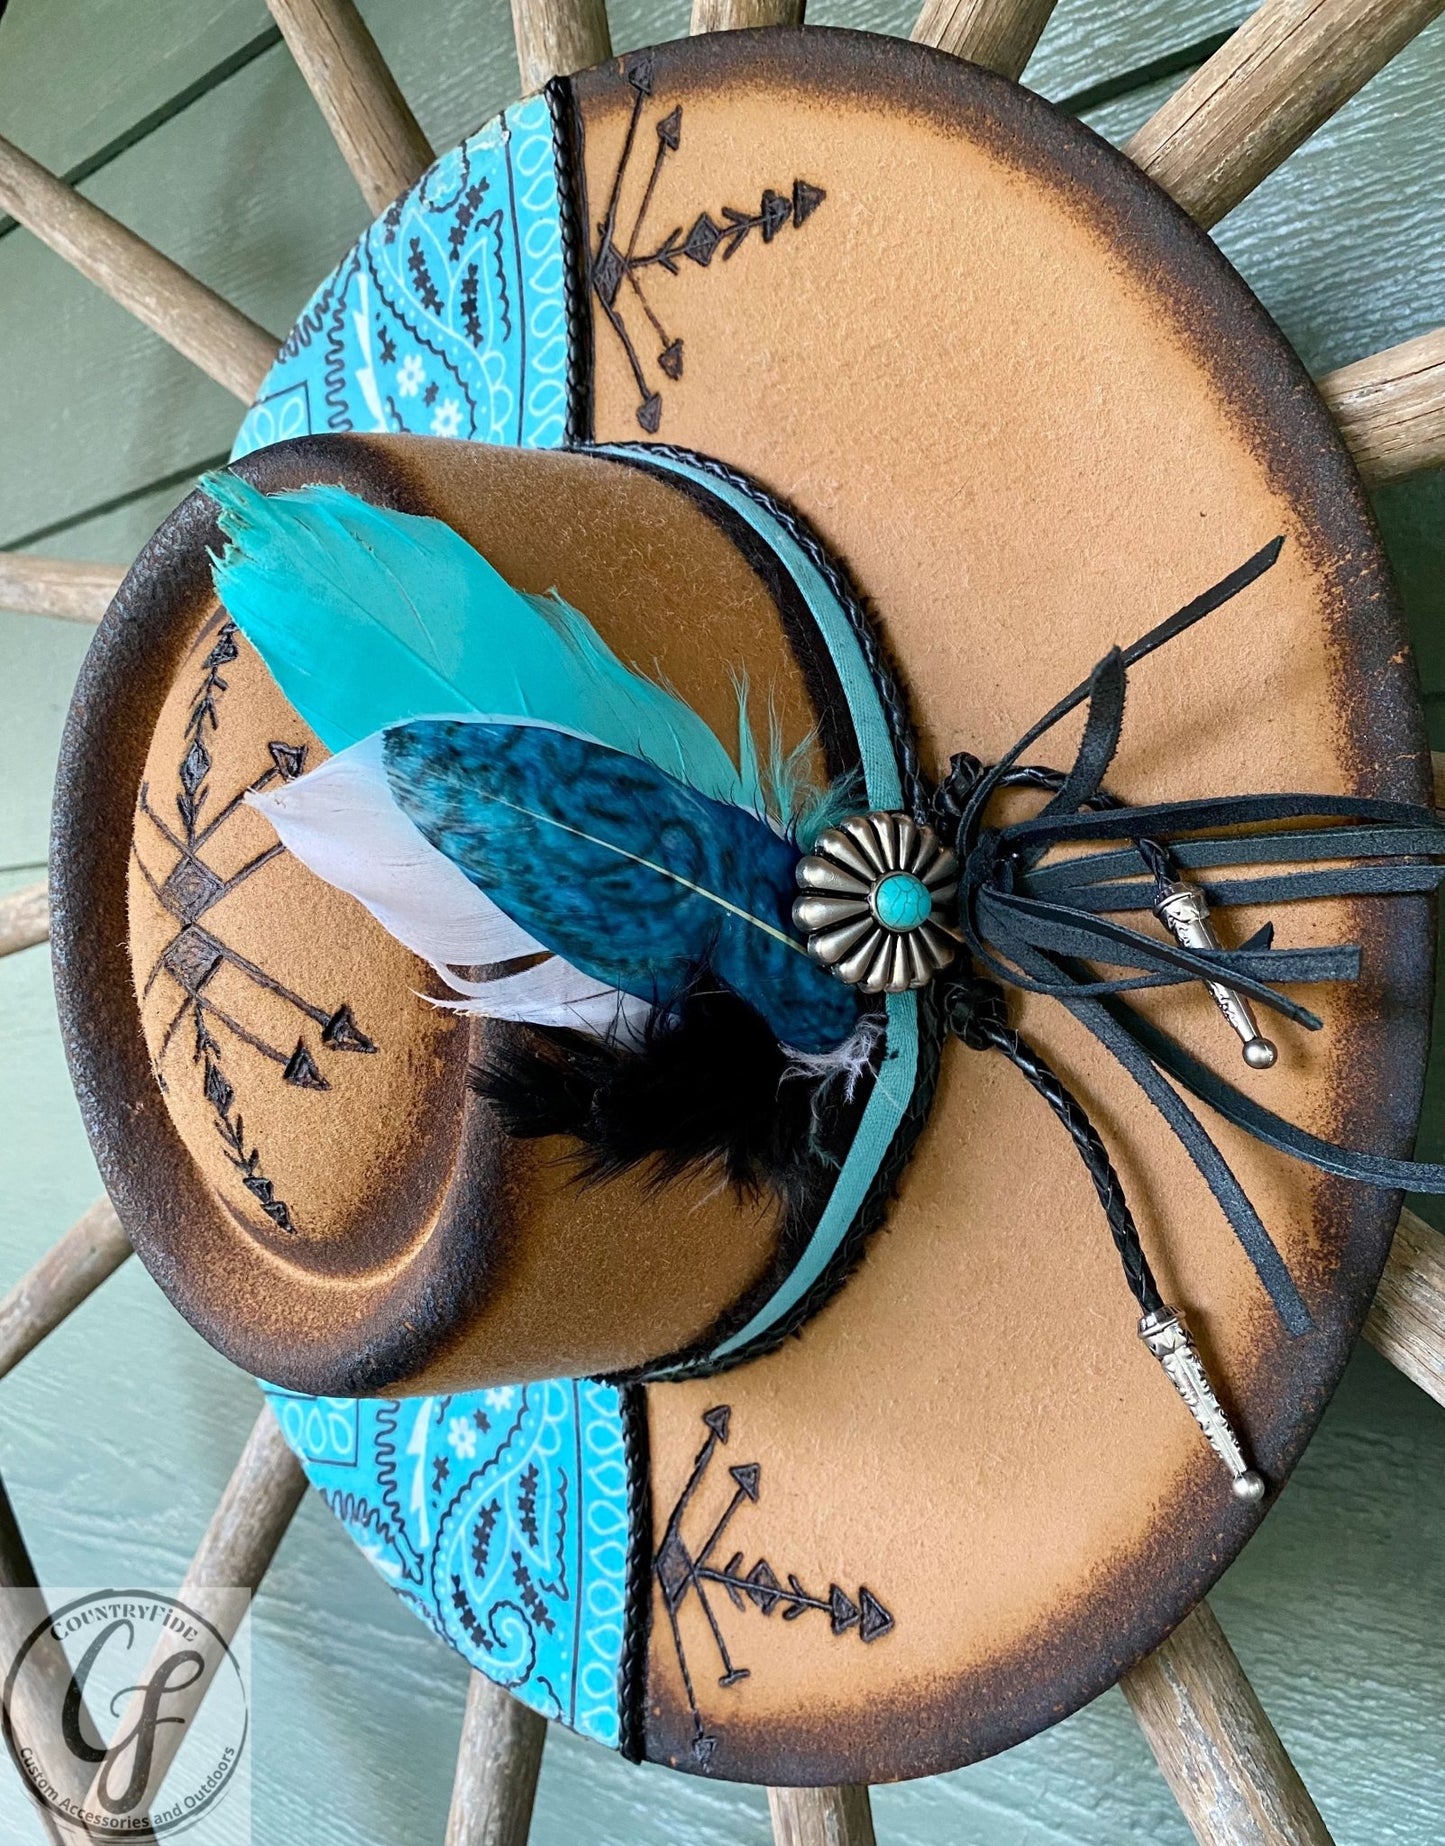 TEAL BANDANNA FEDORA - CountryFide Custom Accessories and Outdoors